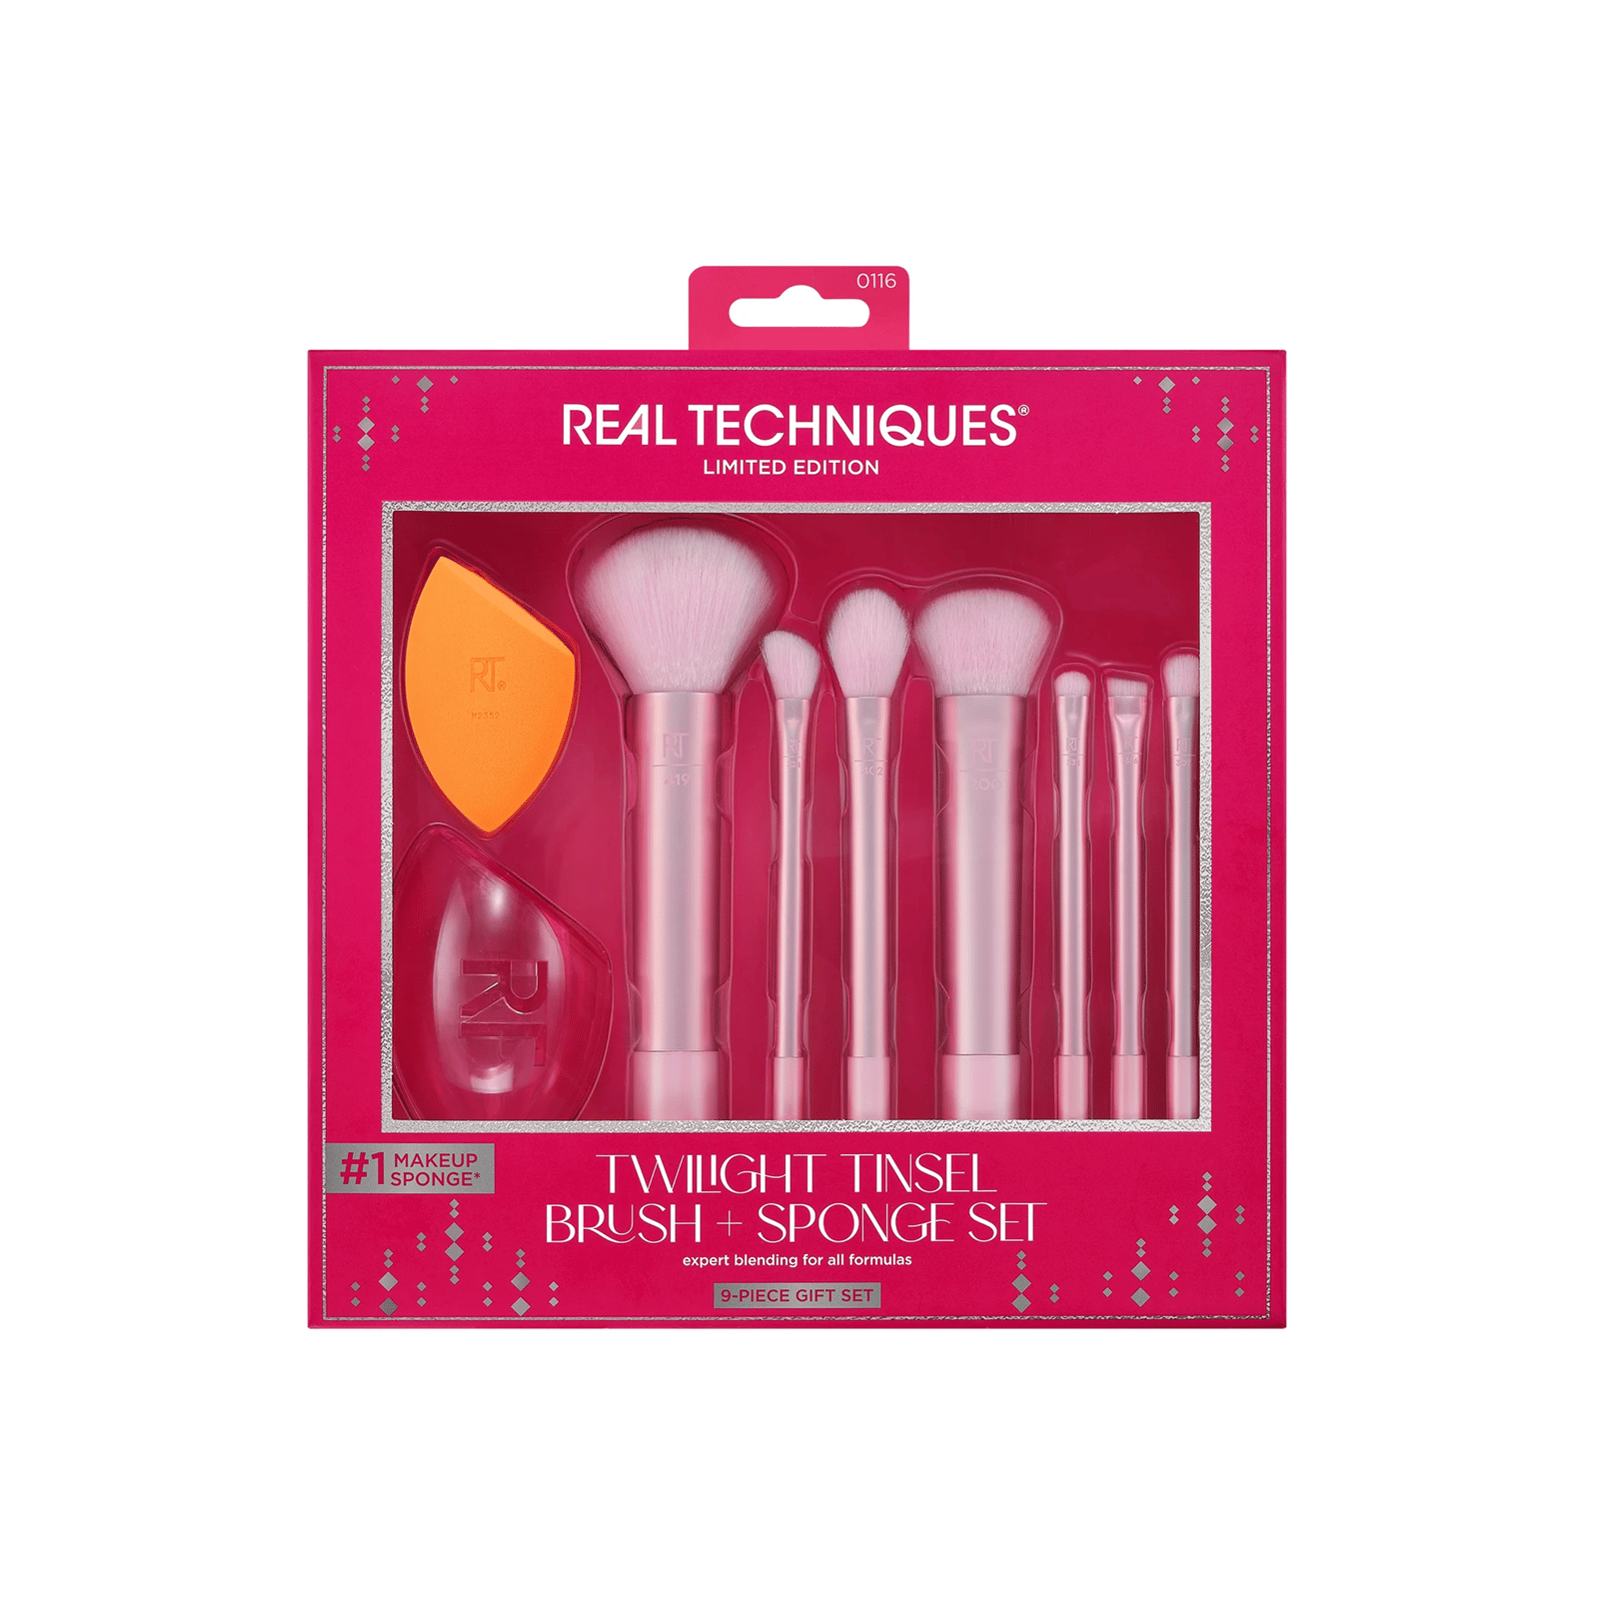 REAL TECHNIQUES on Instagram: It wouldn't be Black Friday without a  limited-time sale 🤩 Run (yes, RUN!) to @ultabeauty for 40% off the  Twilight Tinsel Brush + Sponge Set!